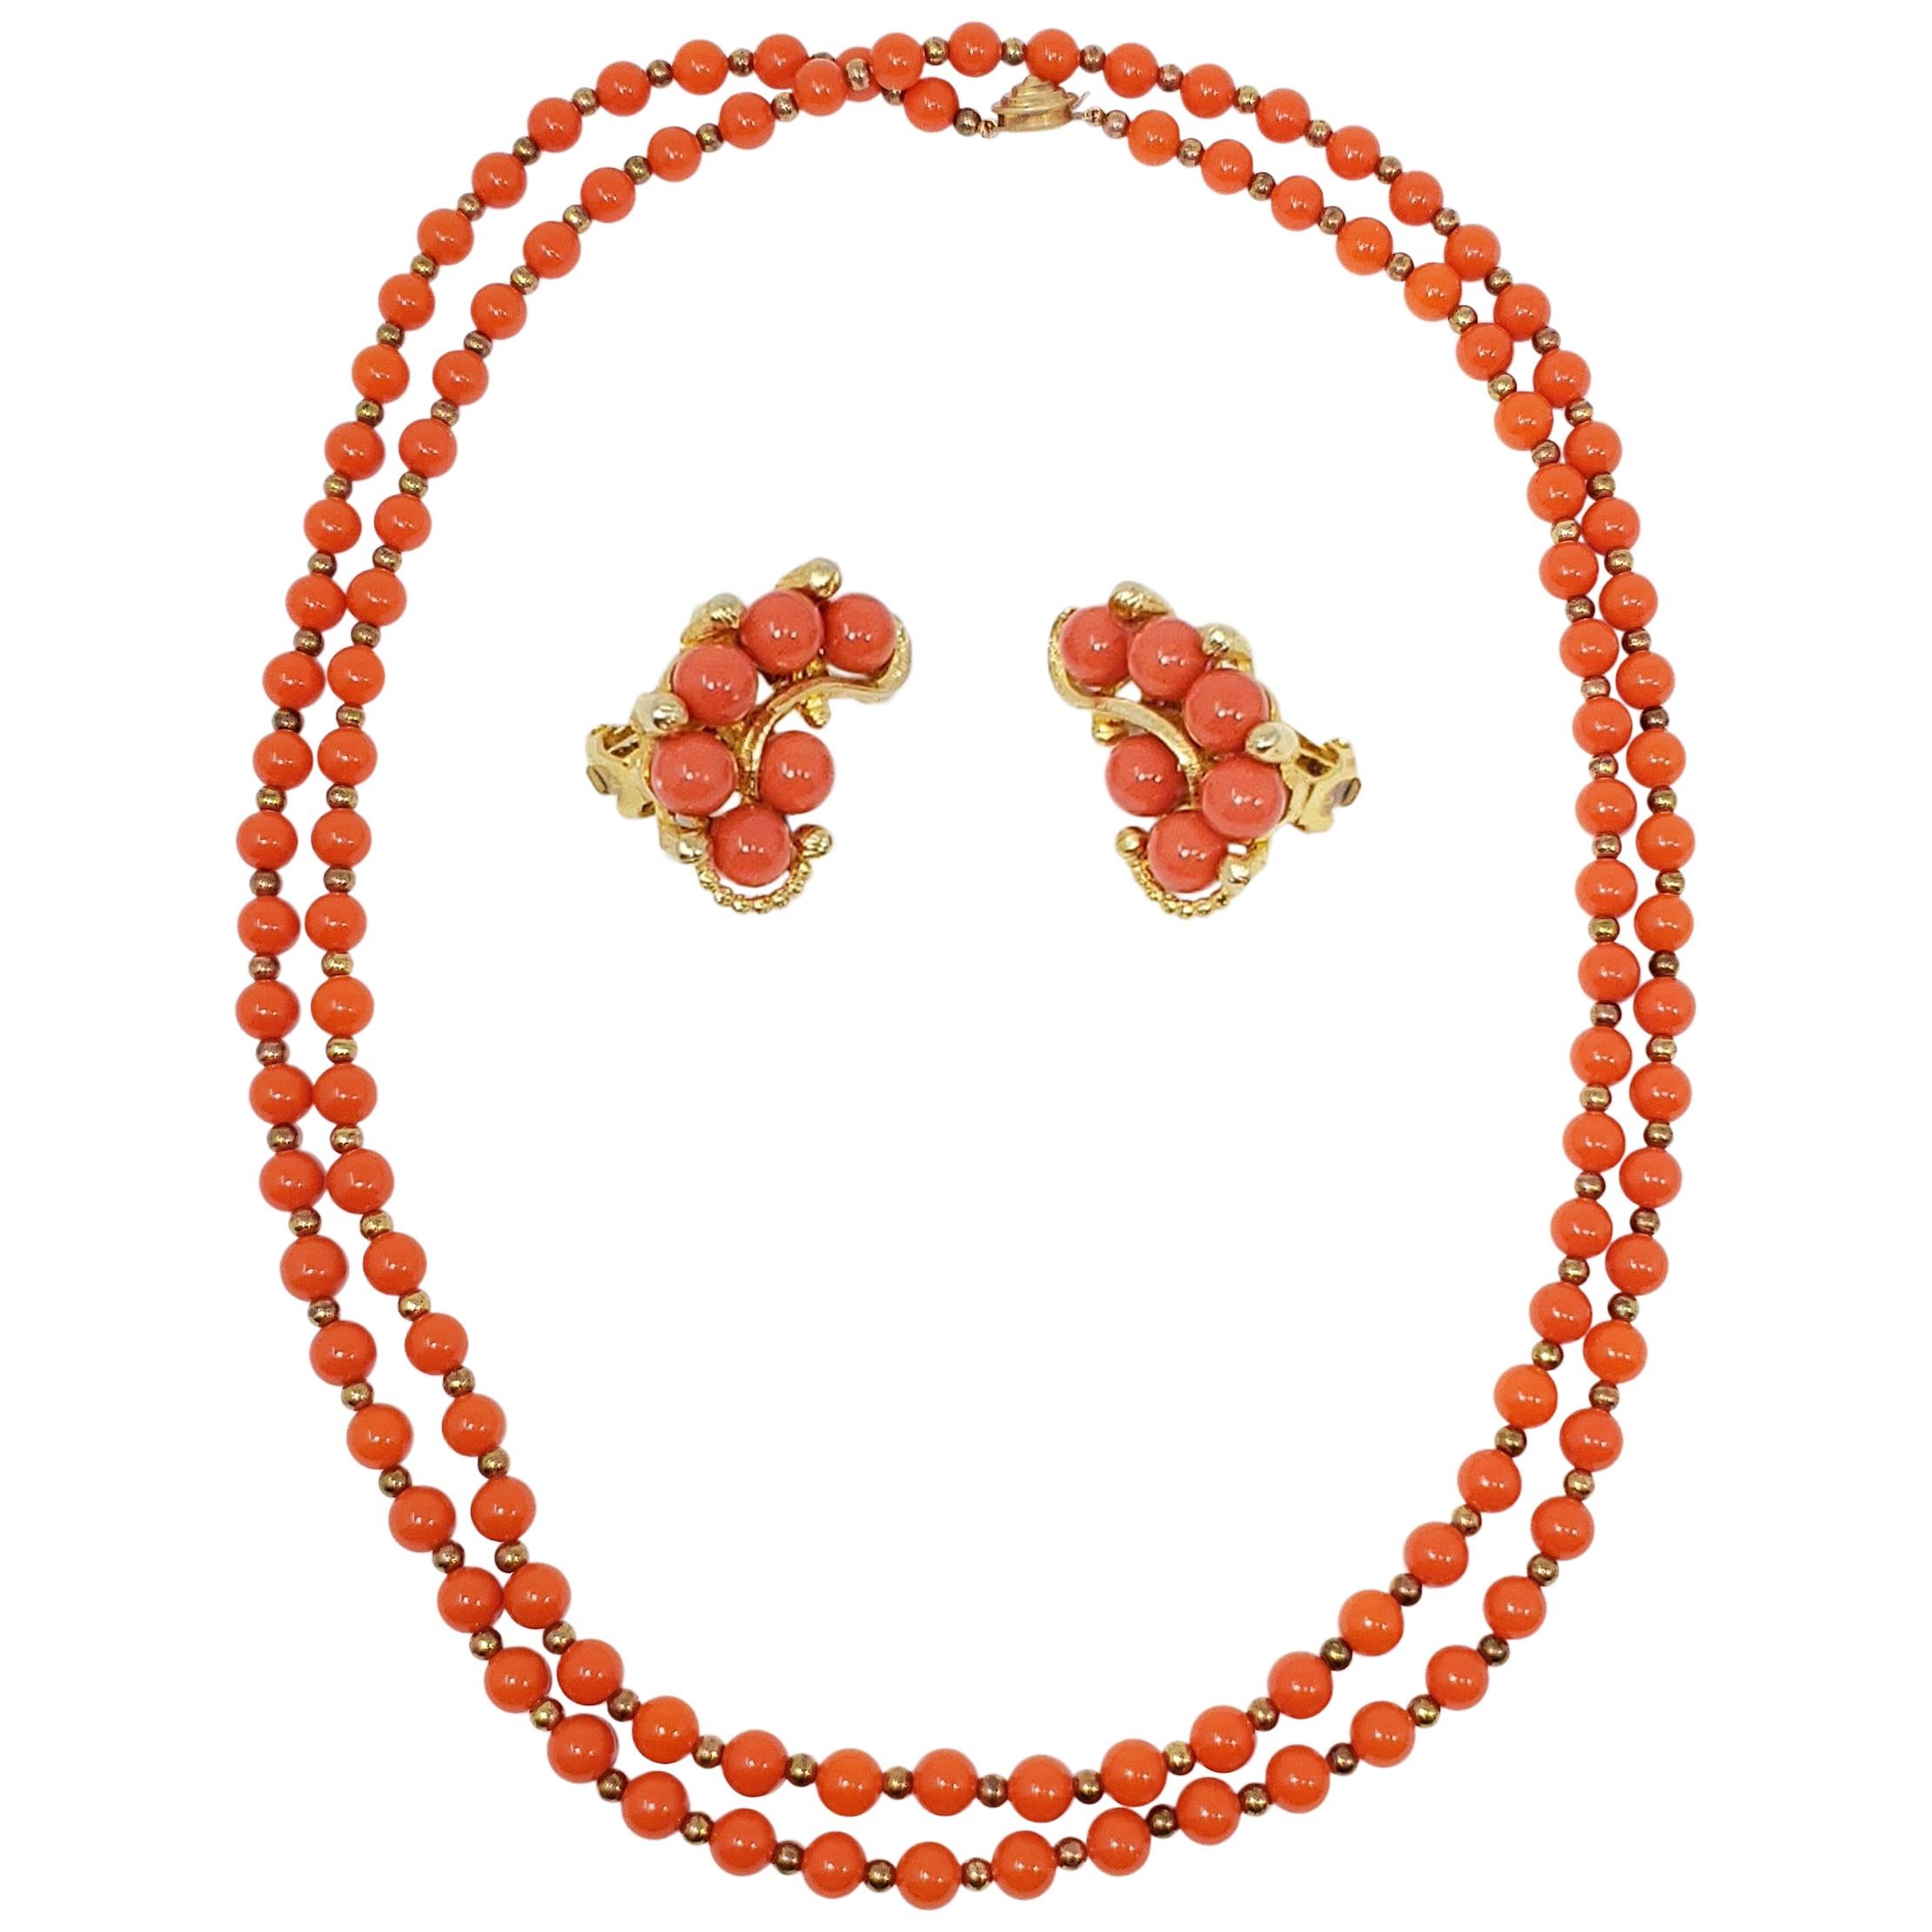 Faux Salmon Coral Bead Rope Necklace and Clip on Earrings in Gold, Mid 1900s For Sale